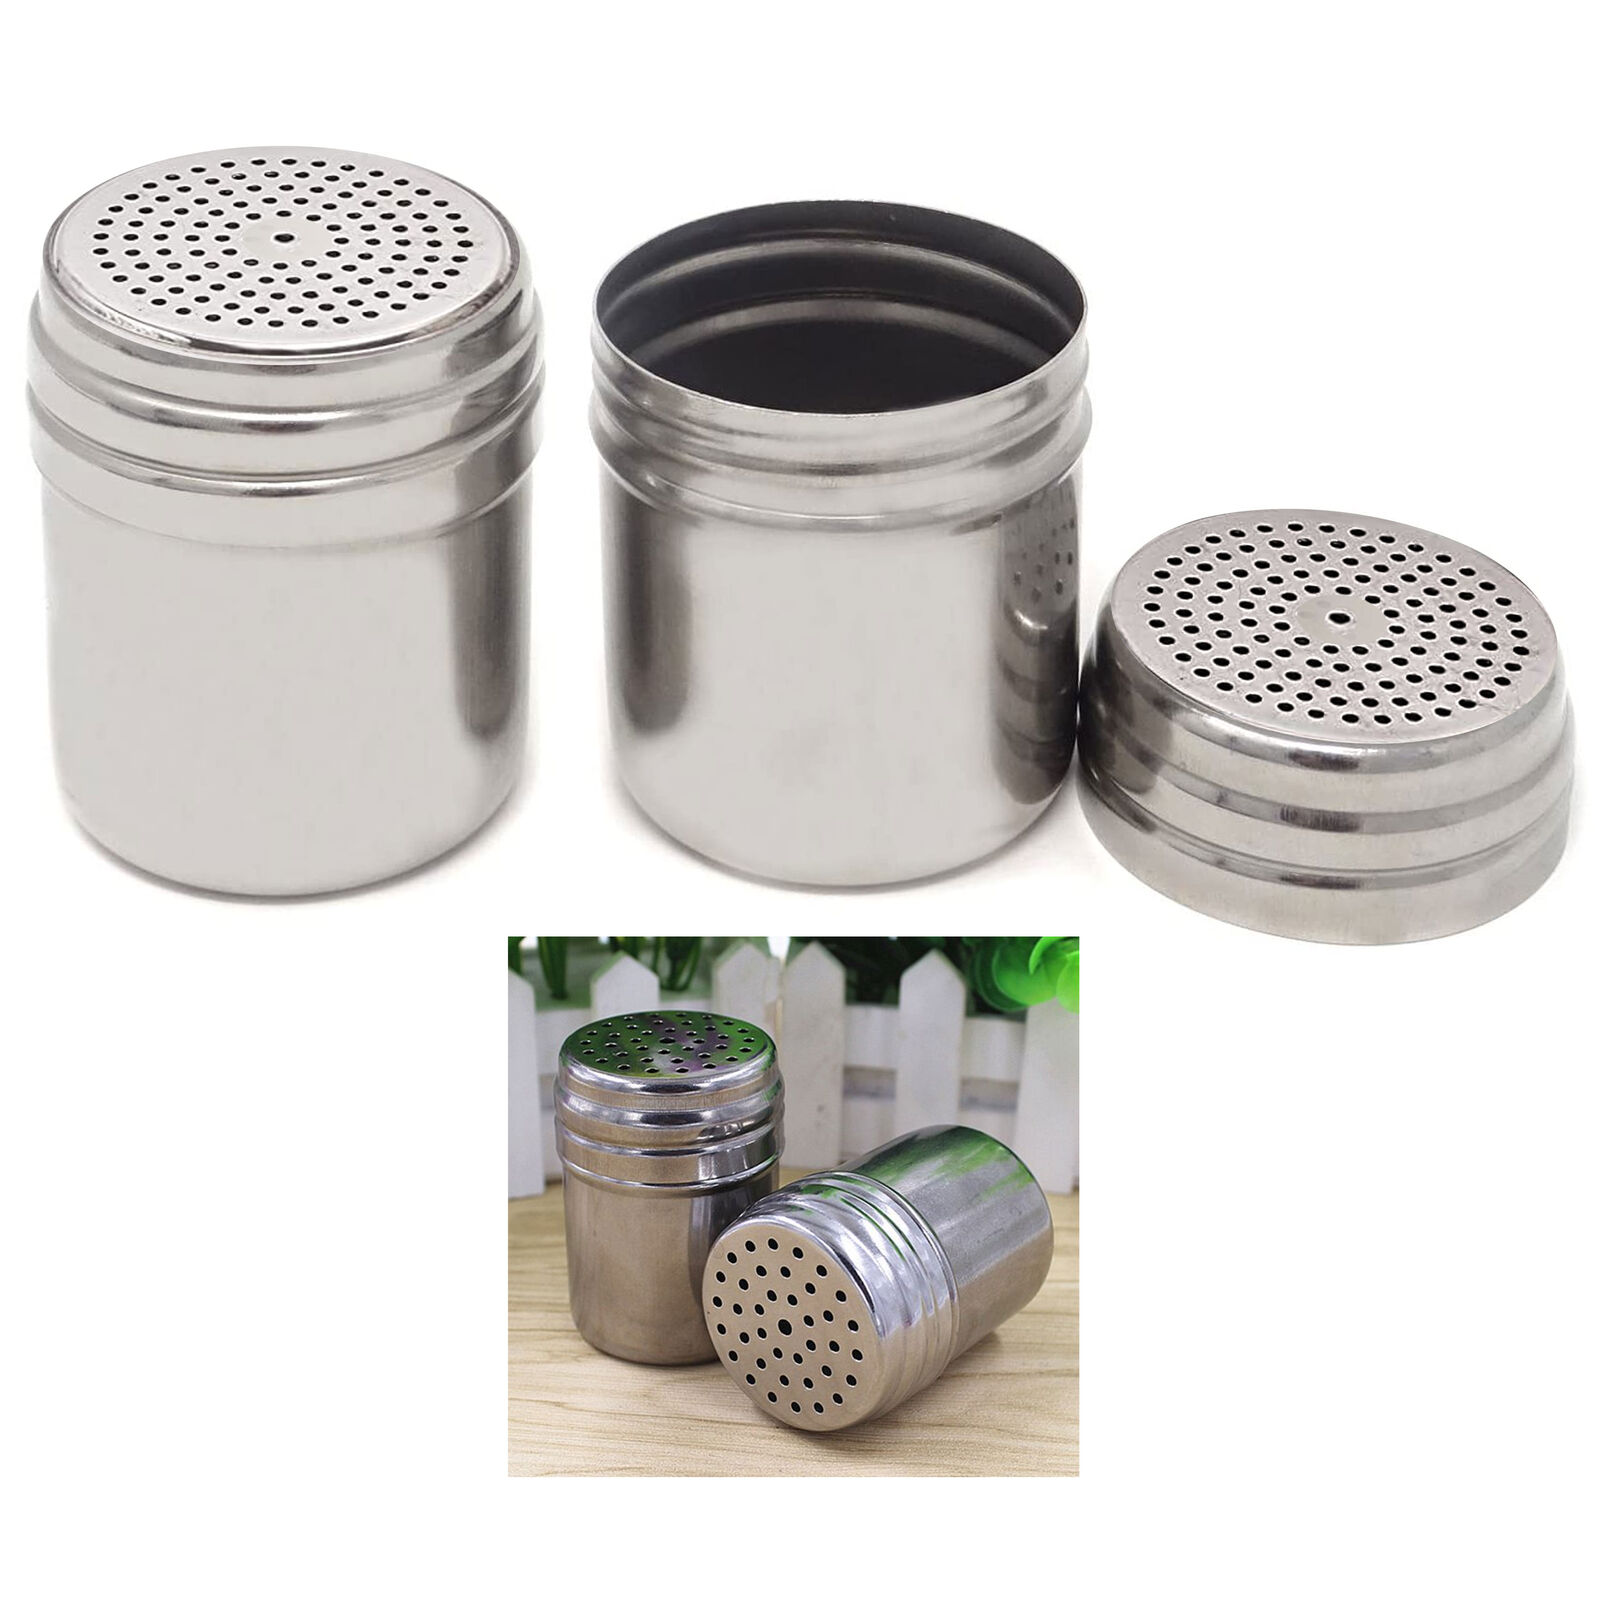 2 Salt Pepper Shakers Stainless Steel Metal Sift Spice Seasoning Containers 10oz